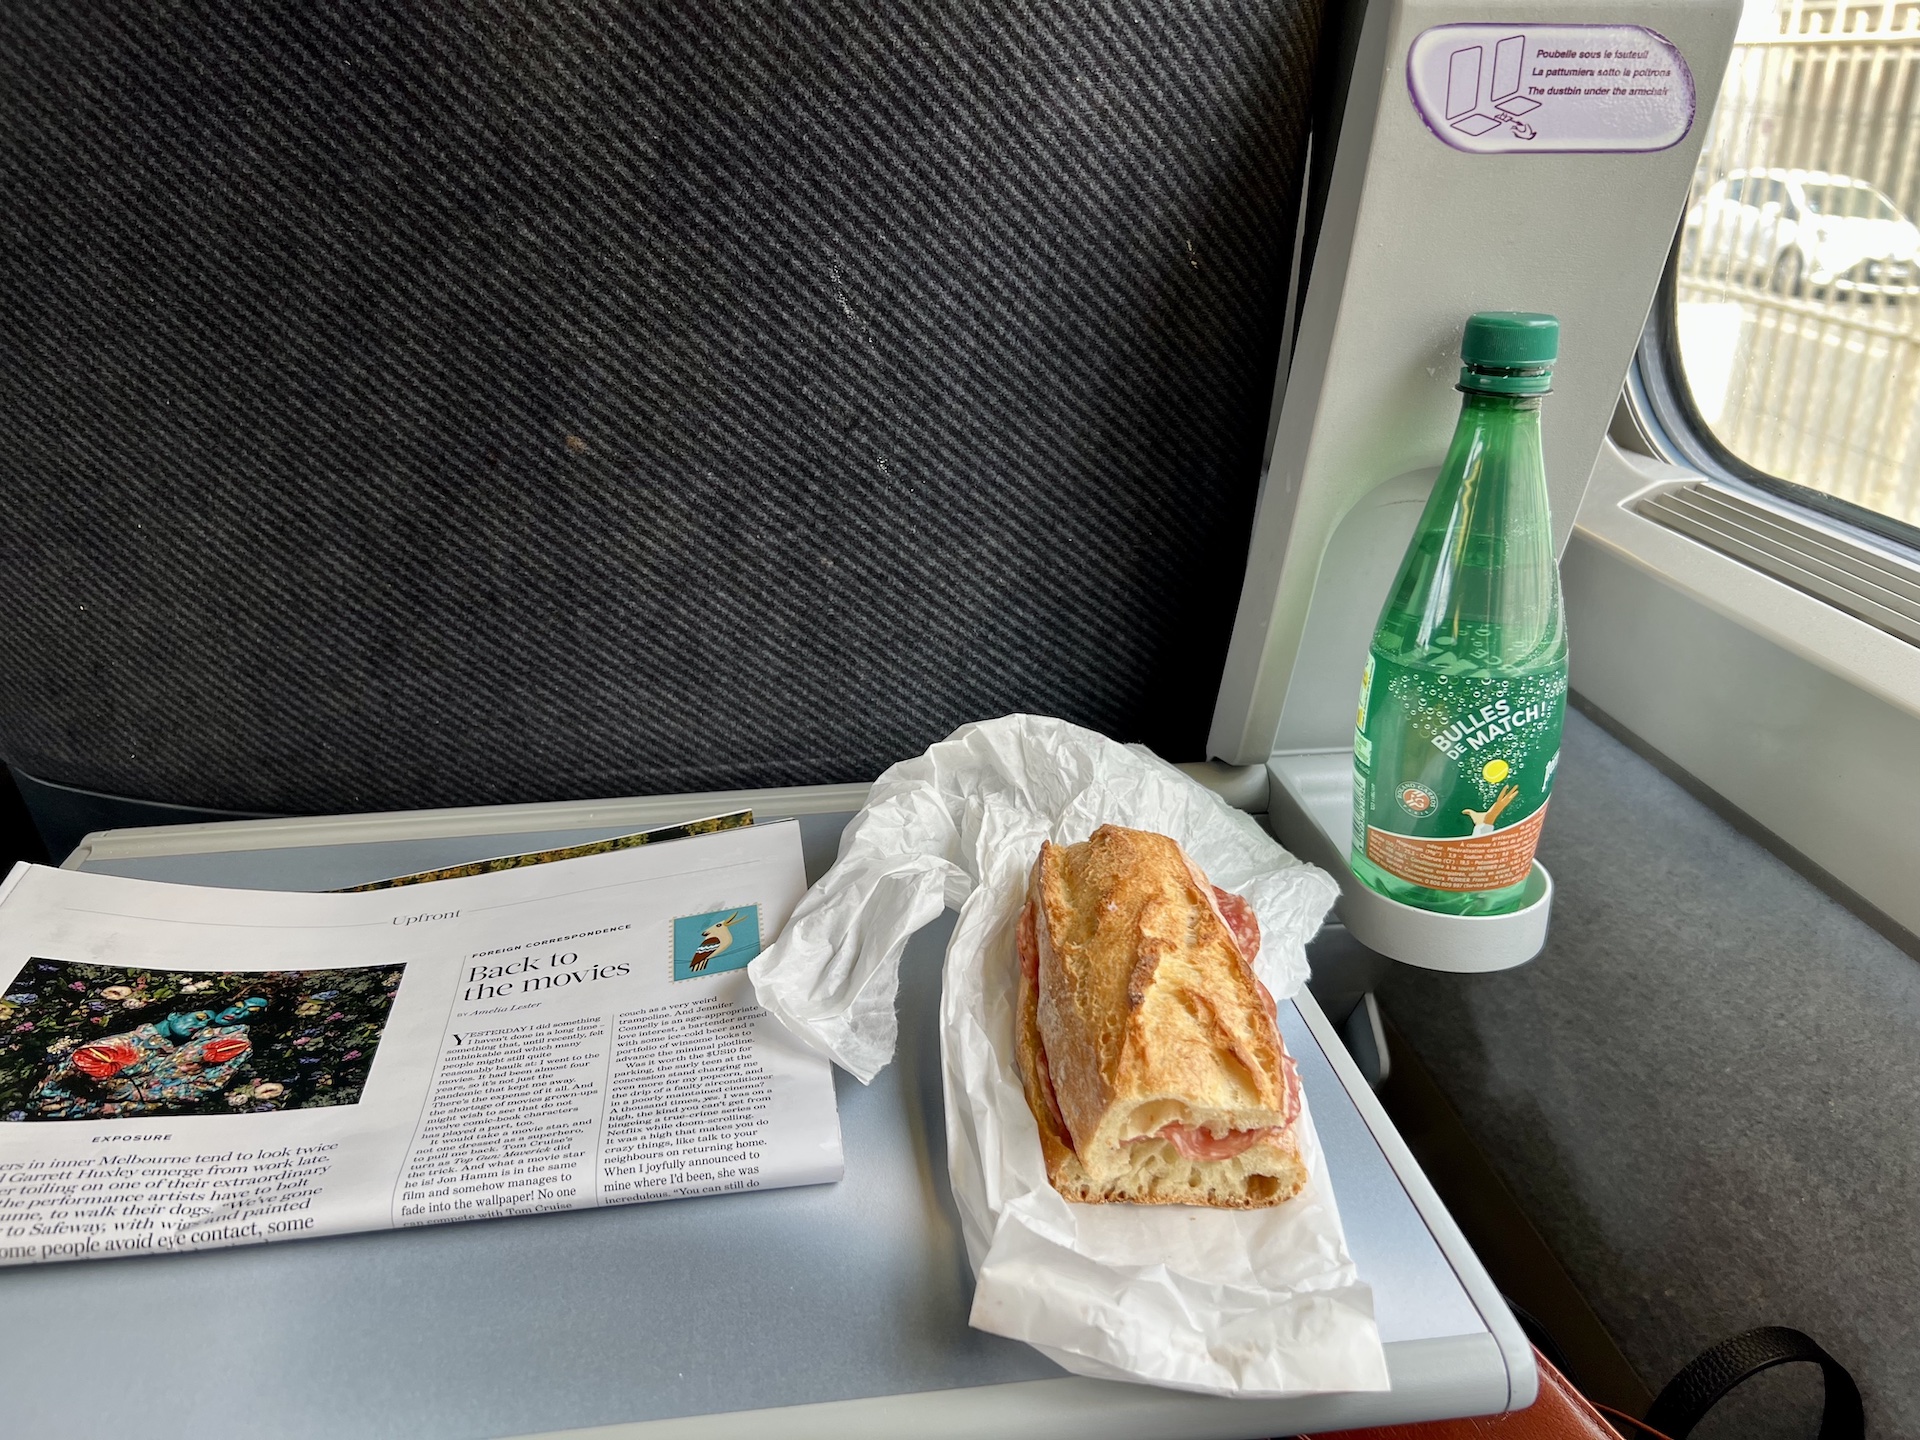 The tray table of a train with a bottle of water, a baguette and a newspaper